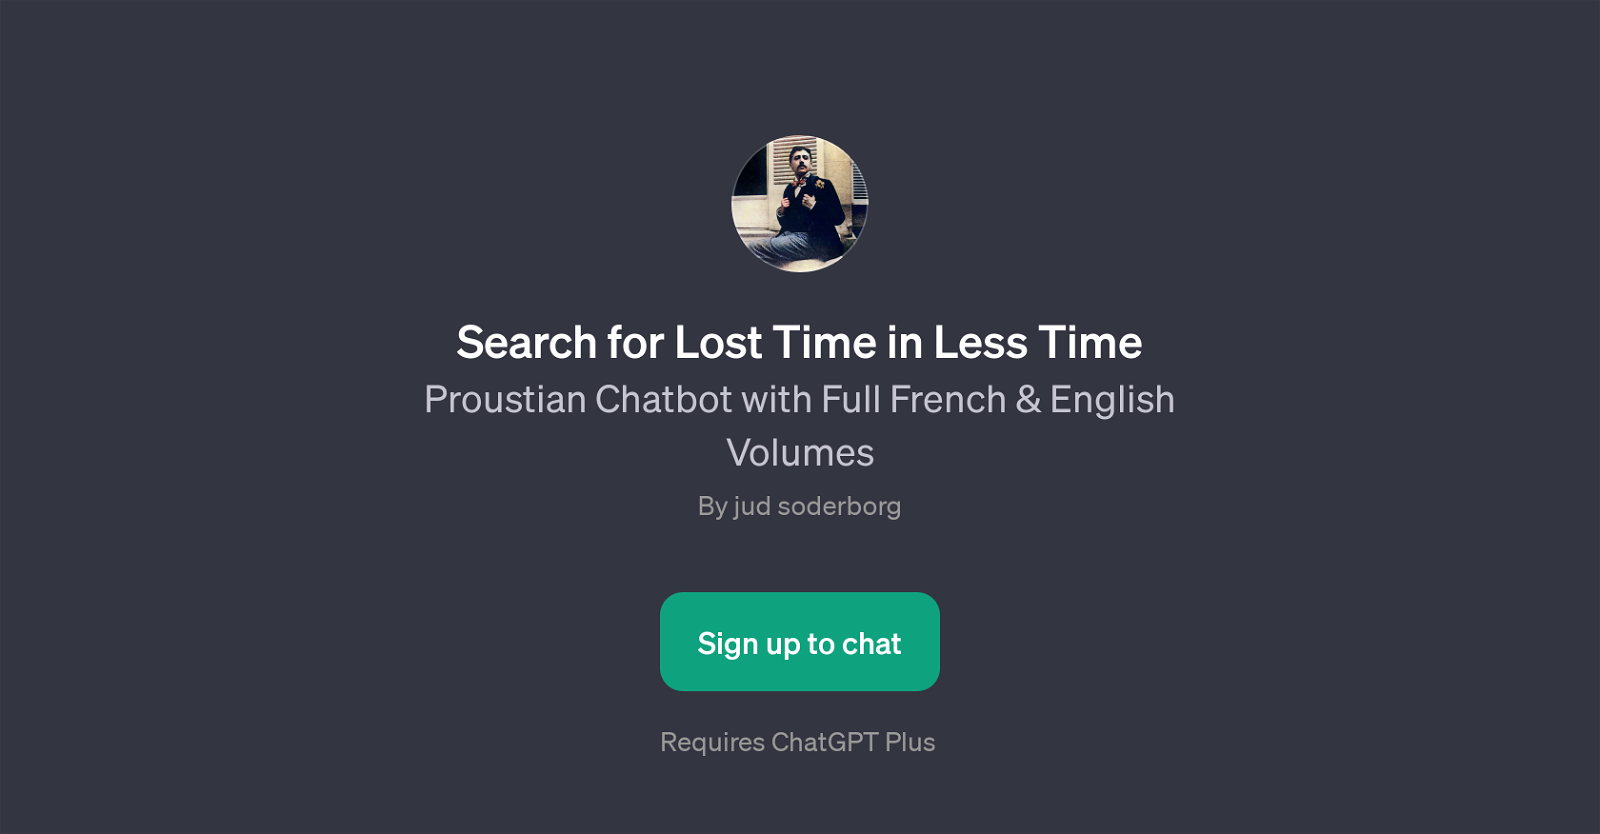 Search for Lost Time in Less Time website